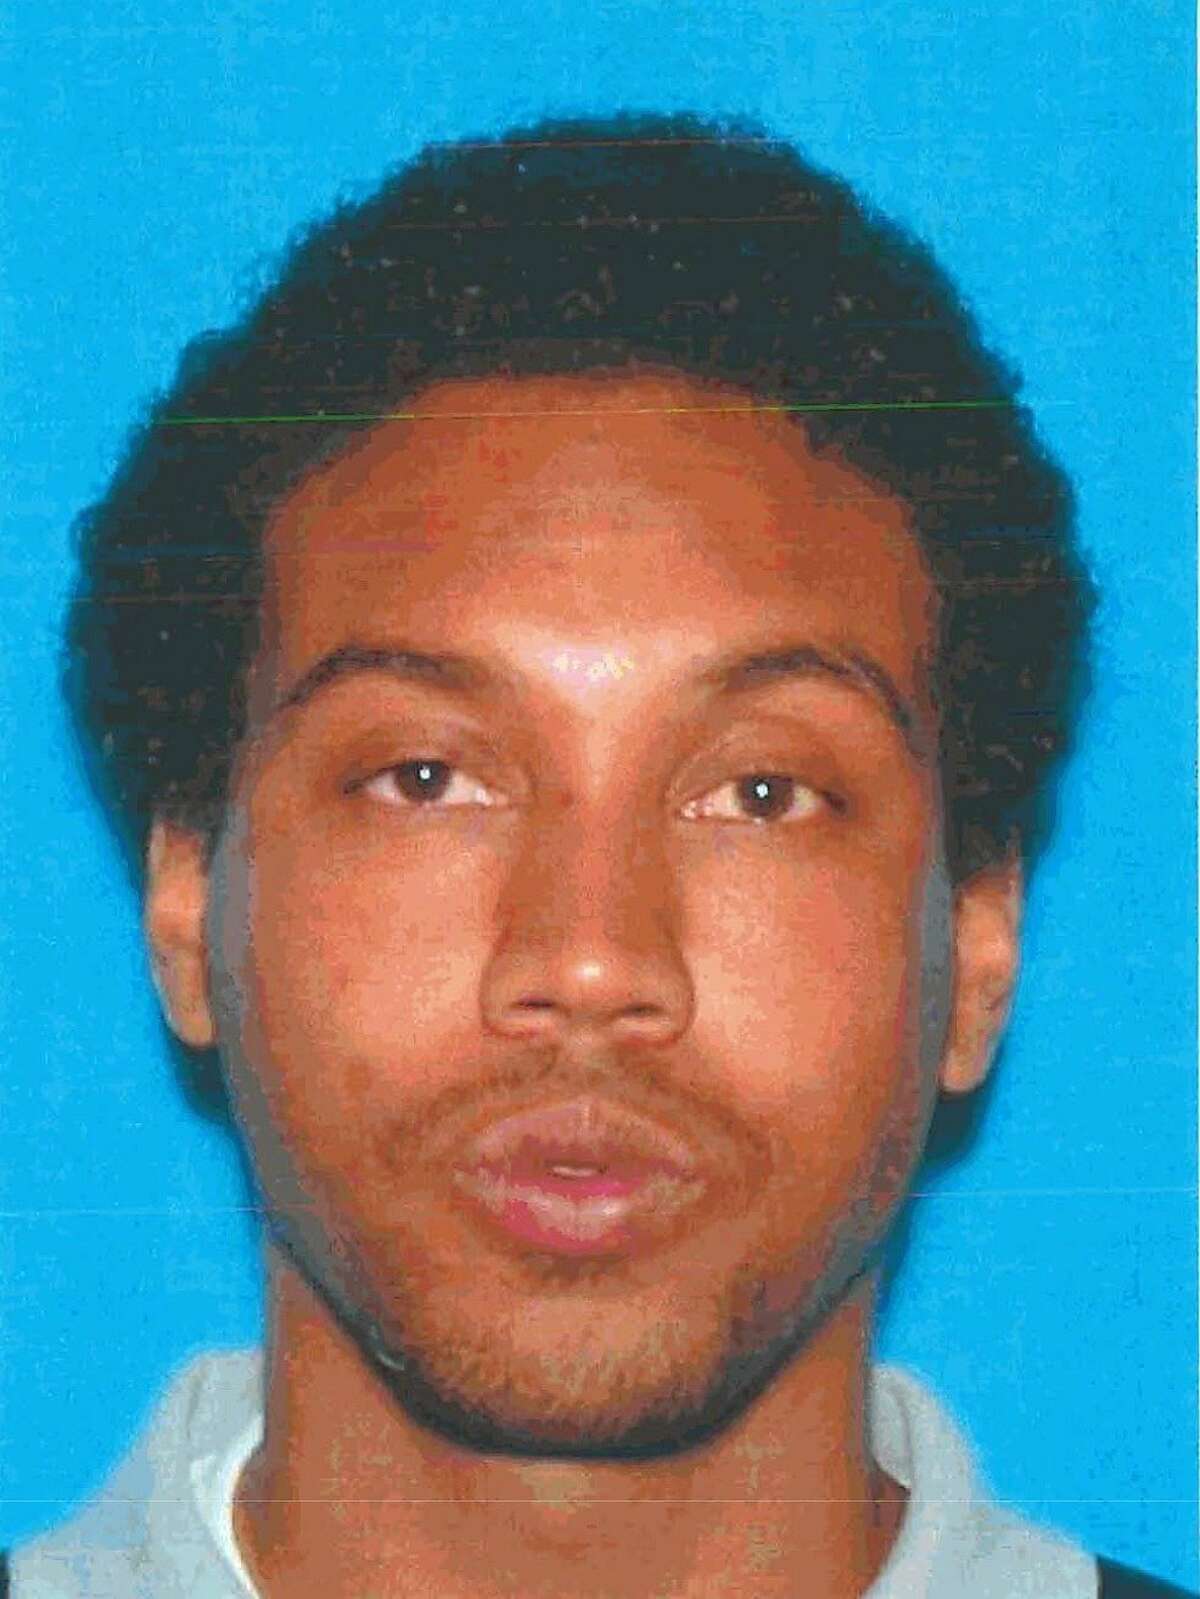 Mario Woods, 26, was shot several times by San Francisco Police.